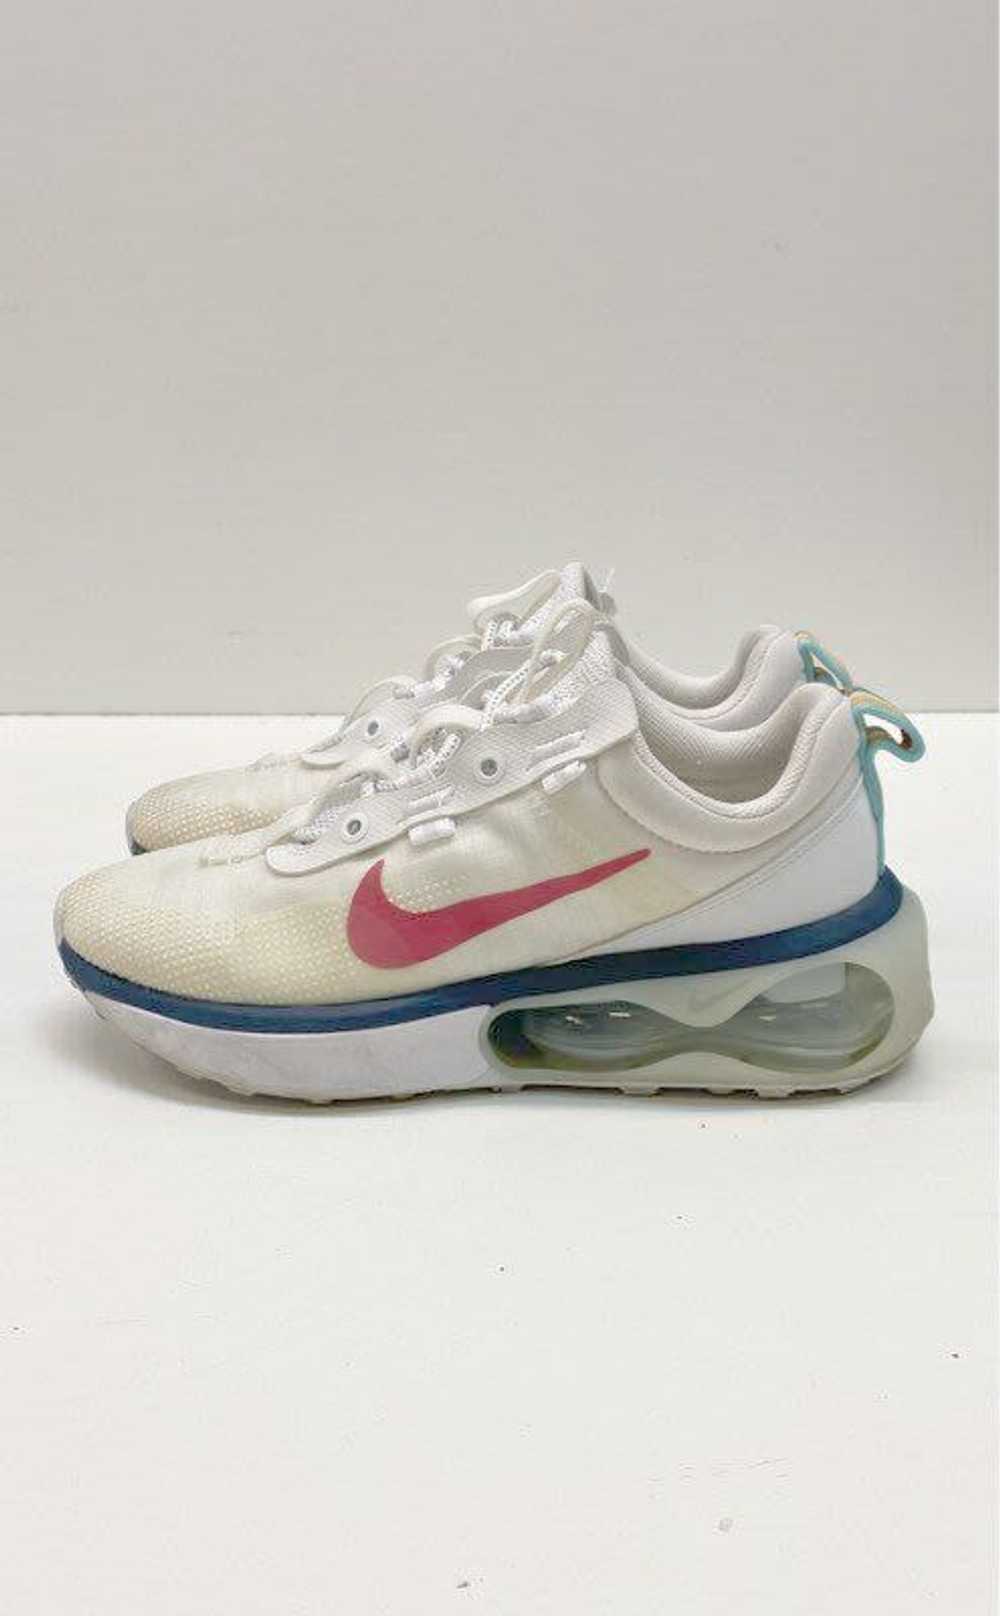 Nike Air Max Sneakers White Gypsy Rose 6.5 - image 2